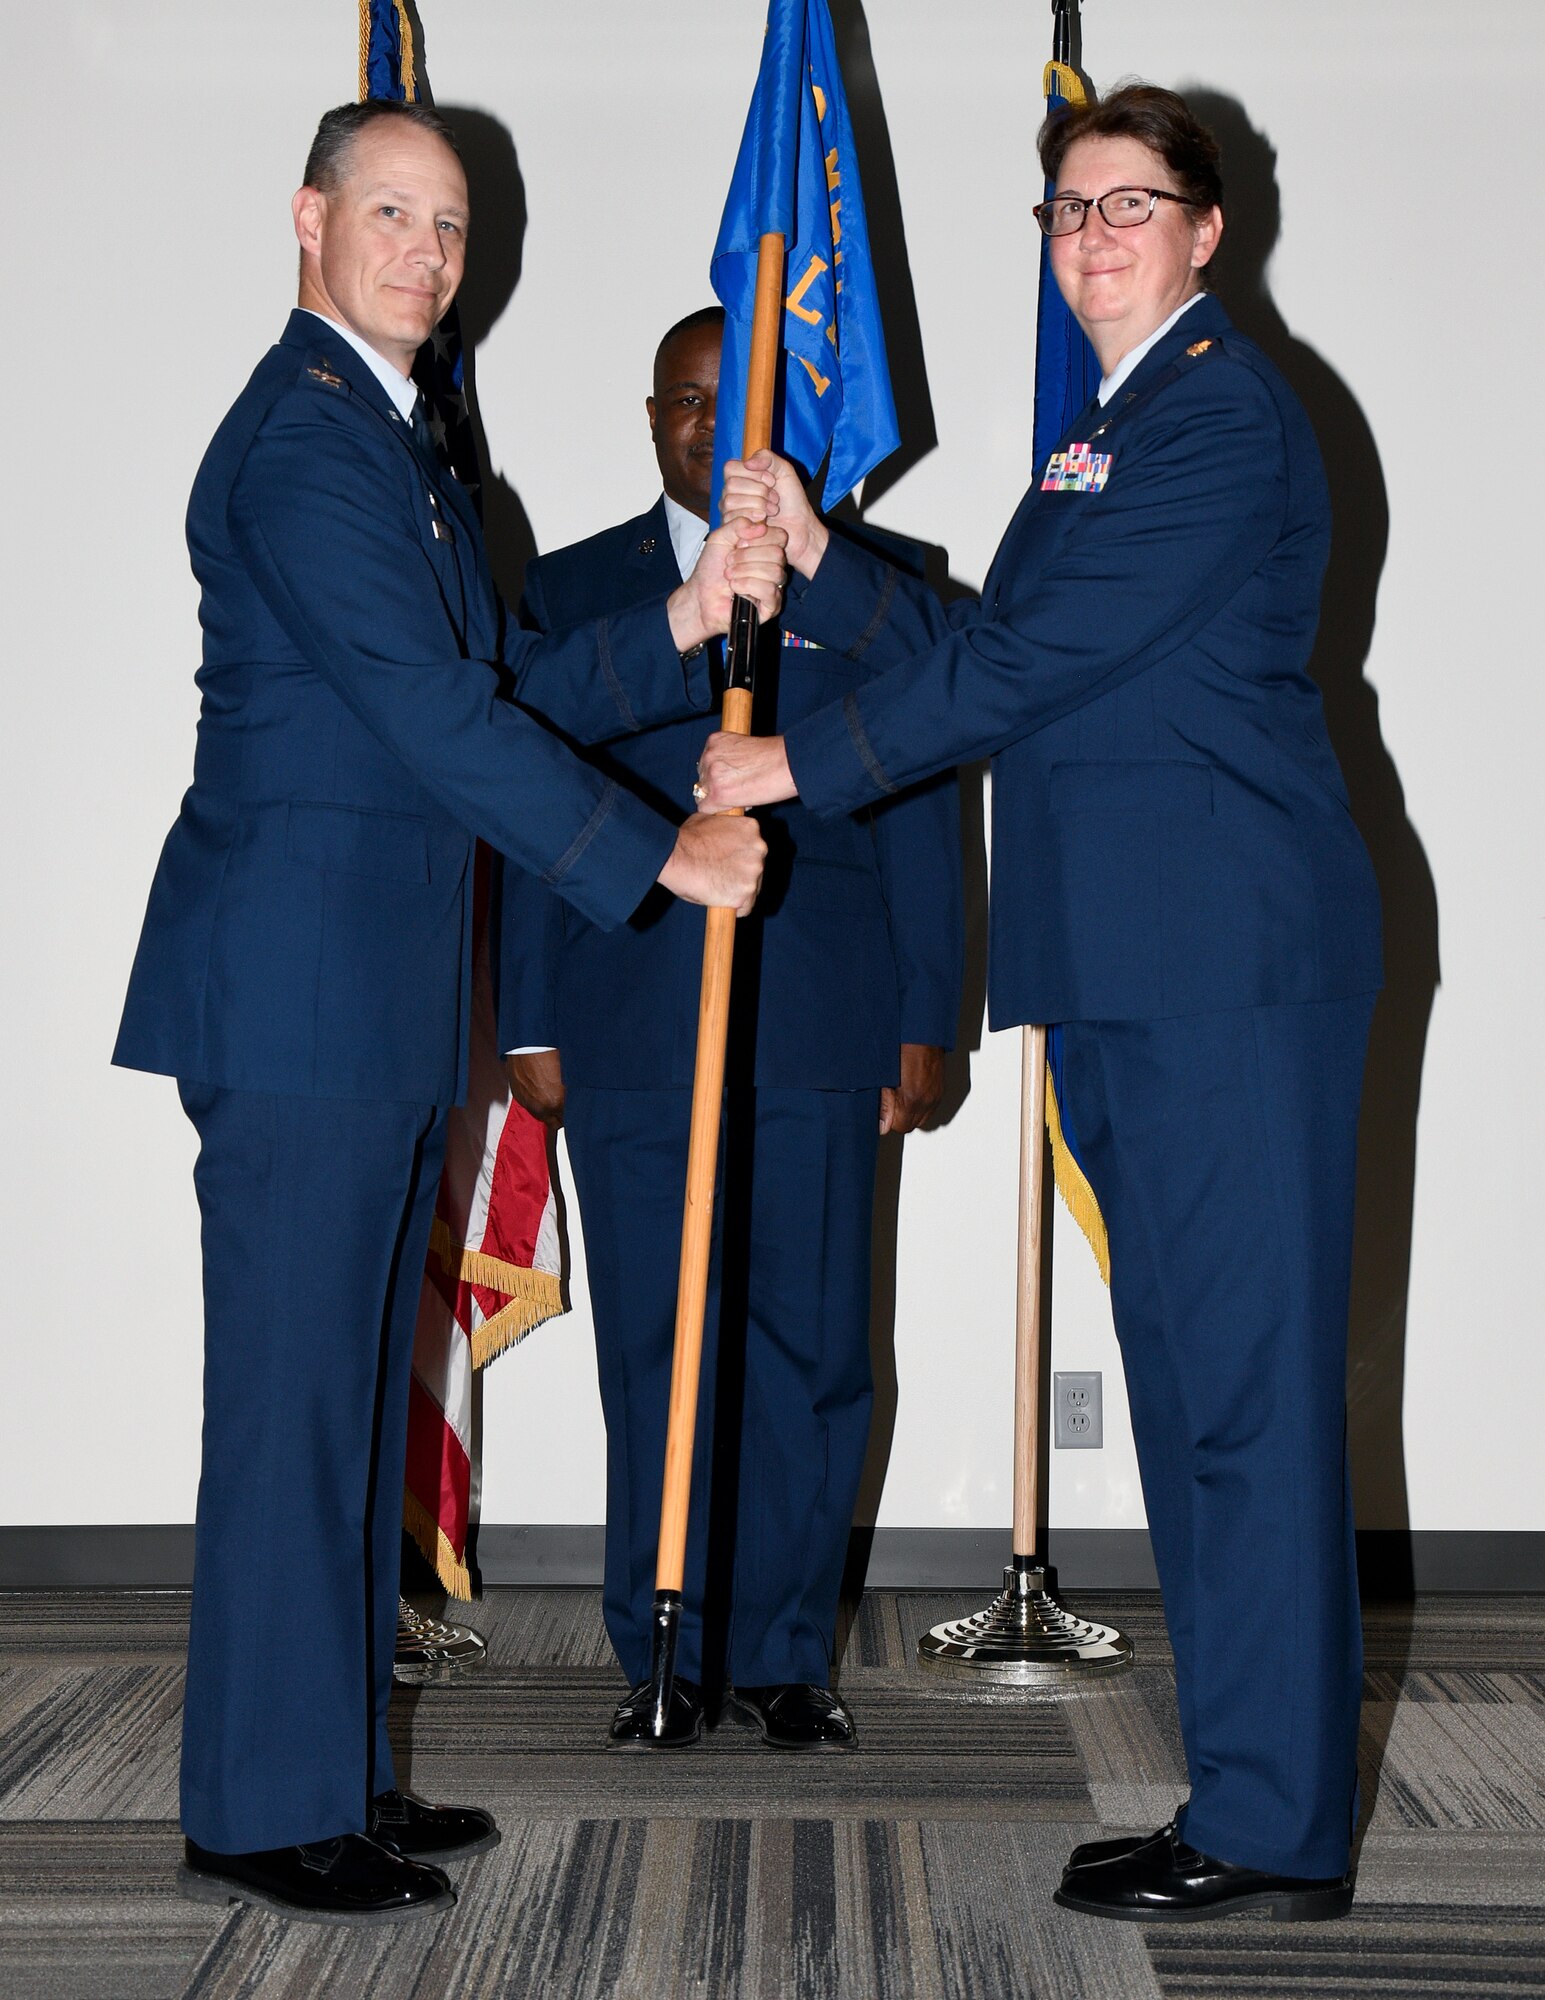 a person accepts the guidon of command from another person.